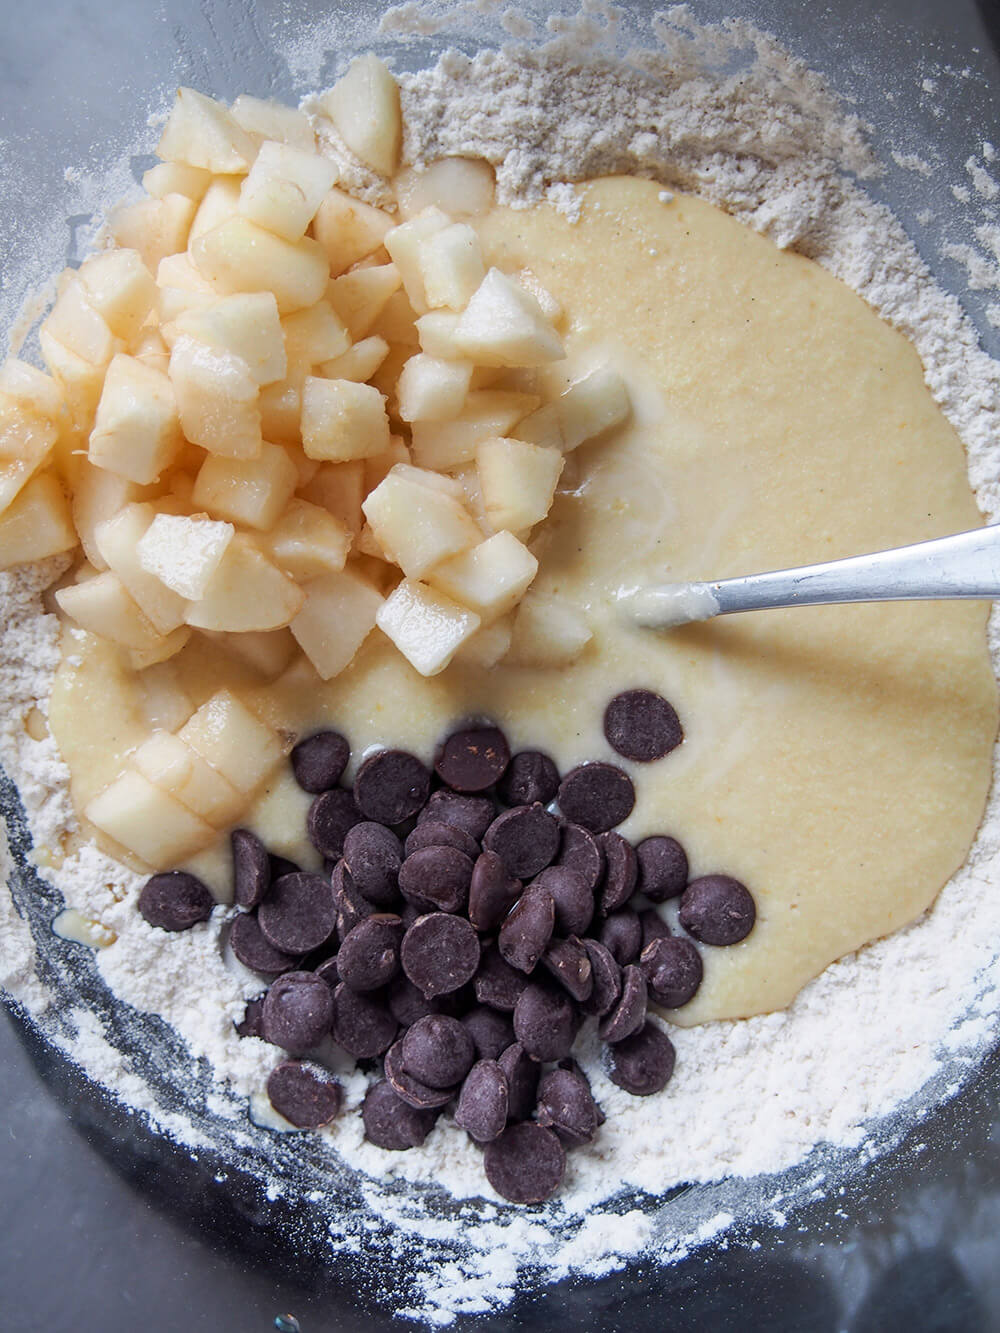 adding wet ingredients, pear and chocolate chips to dry ingredients